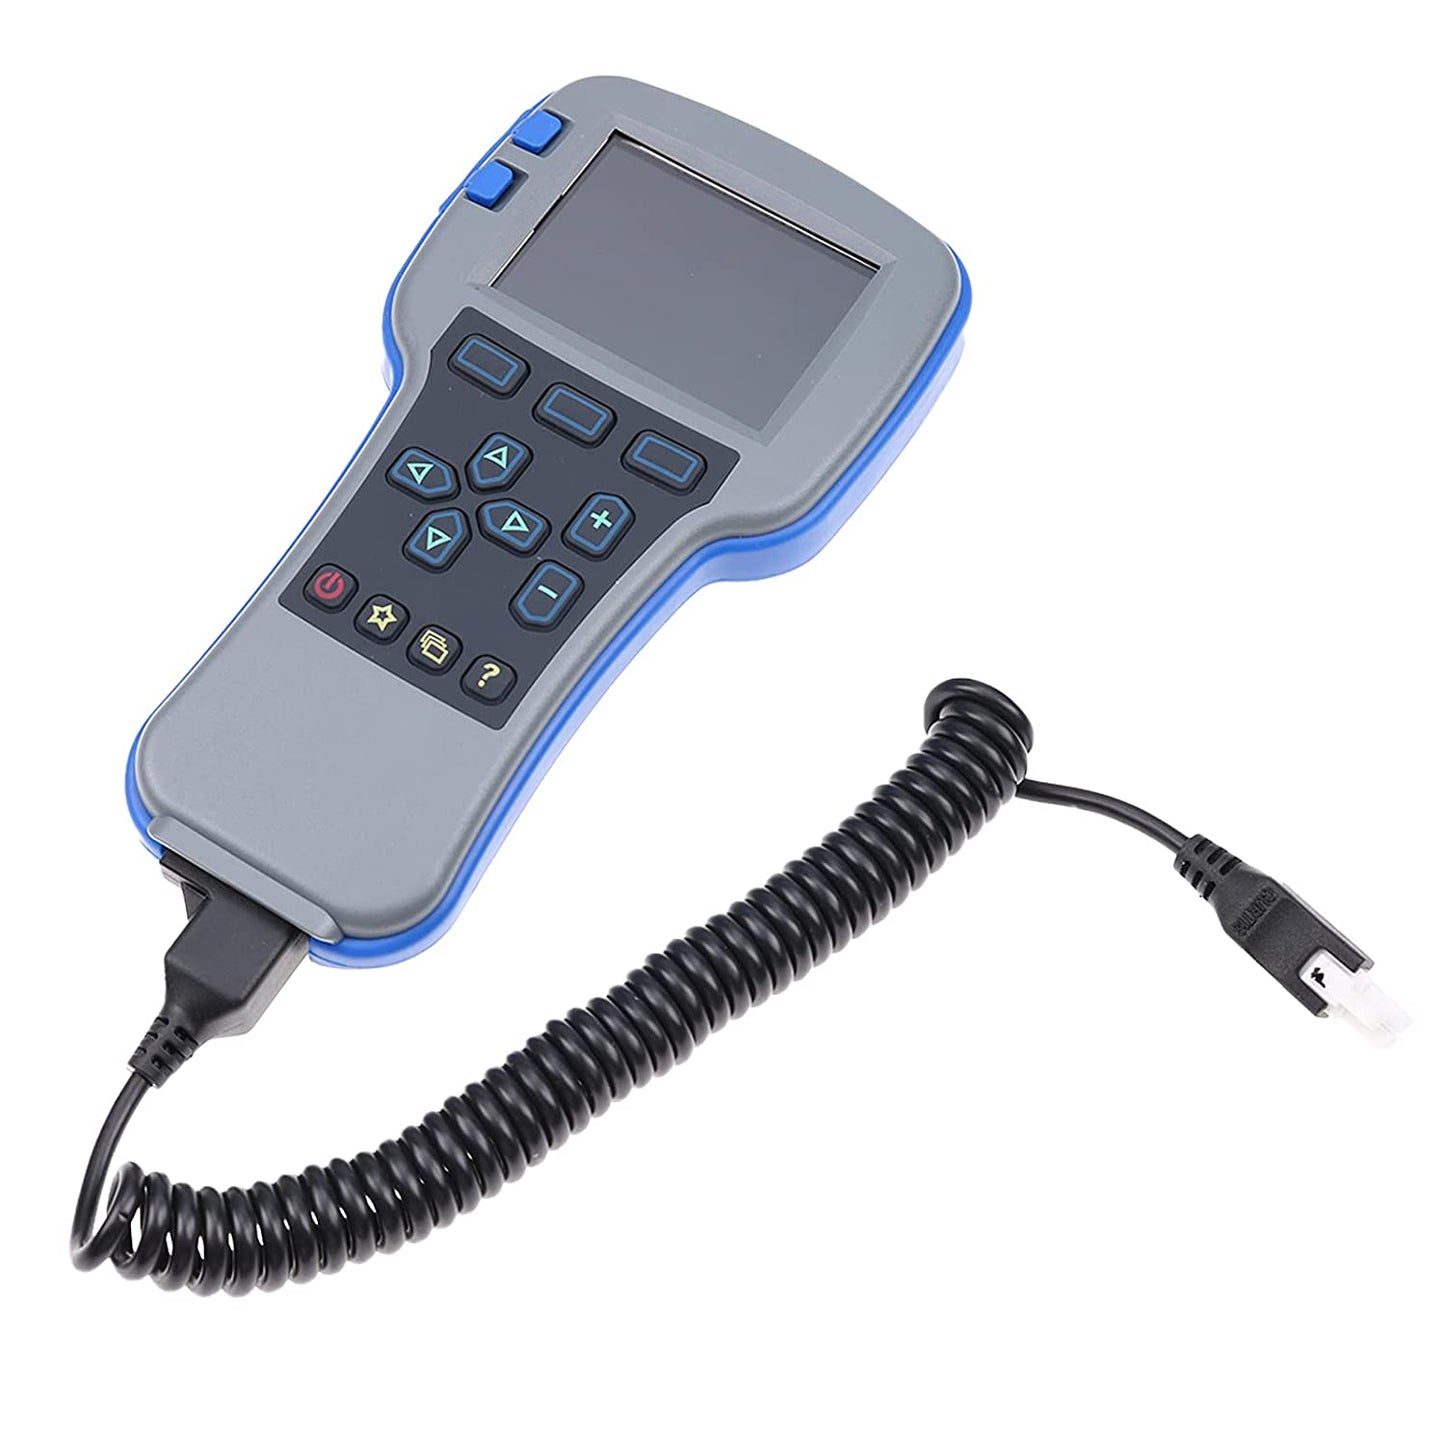 New 1313-4431 1311-4401 1313-4331 Full Function Handheld Programmer Compatible with Curtis Handheld Programmer Electric Forklift Control Programmer Parts